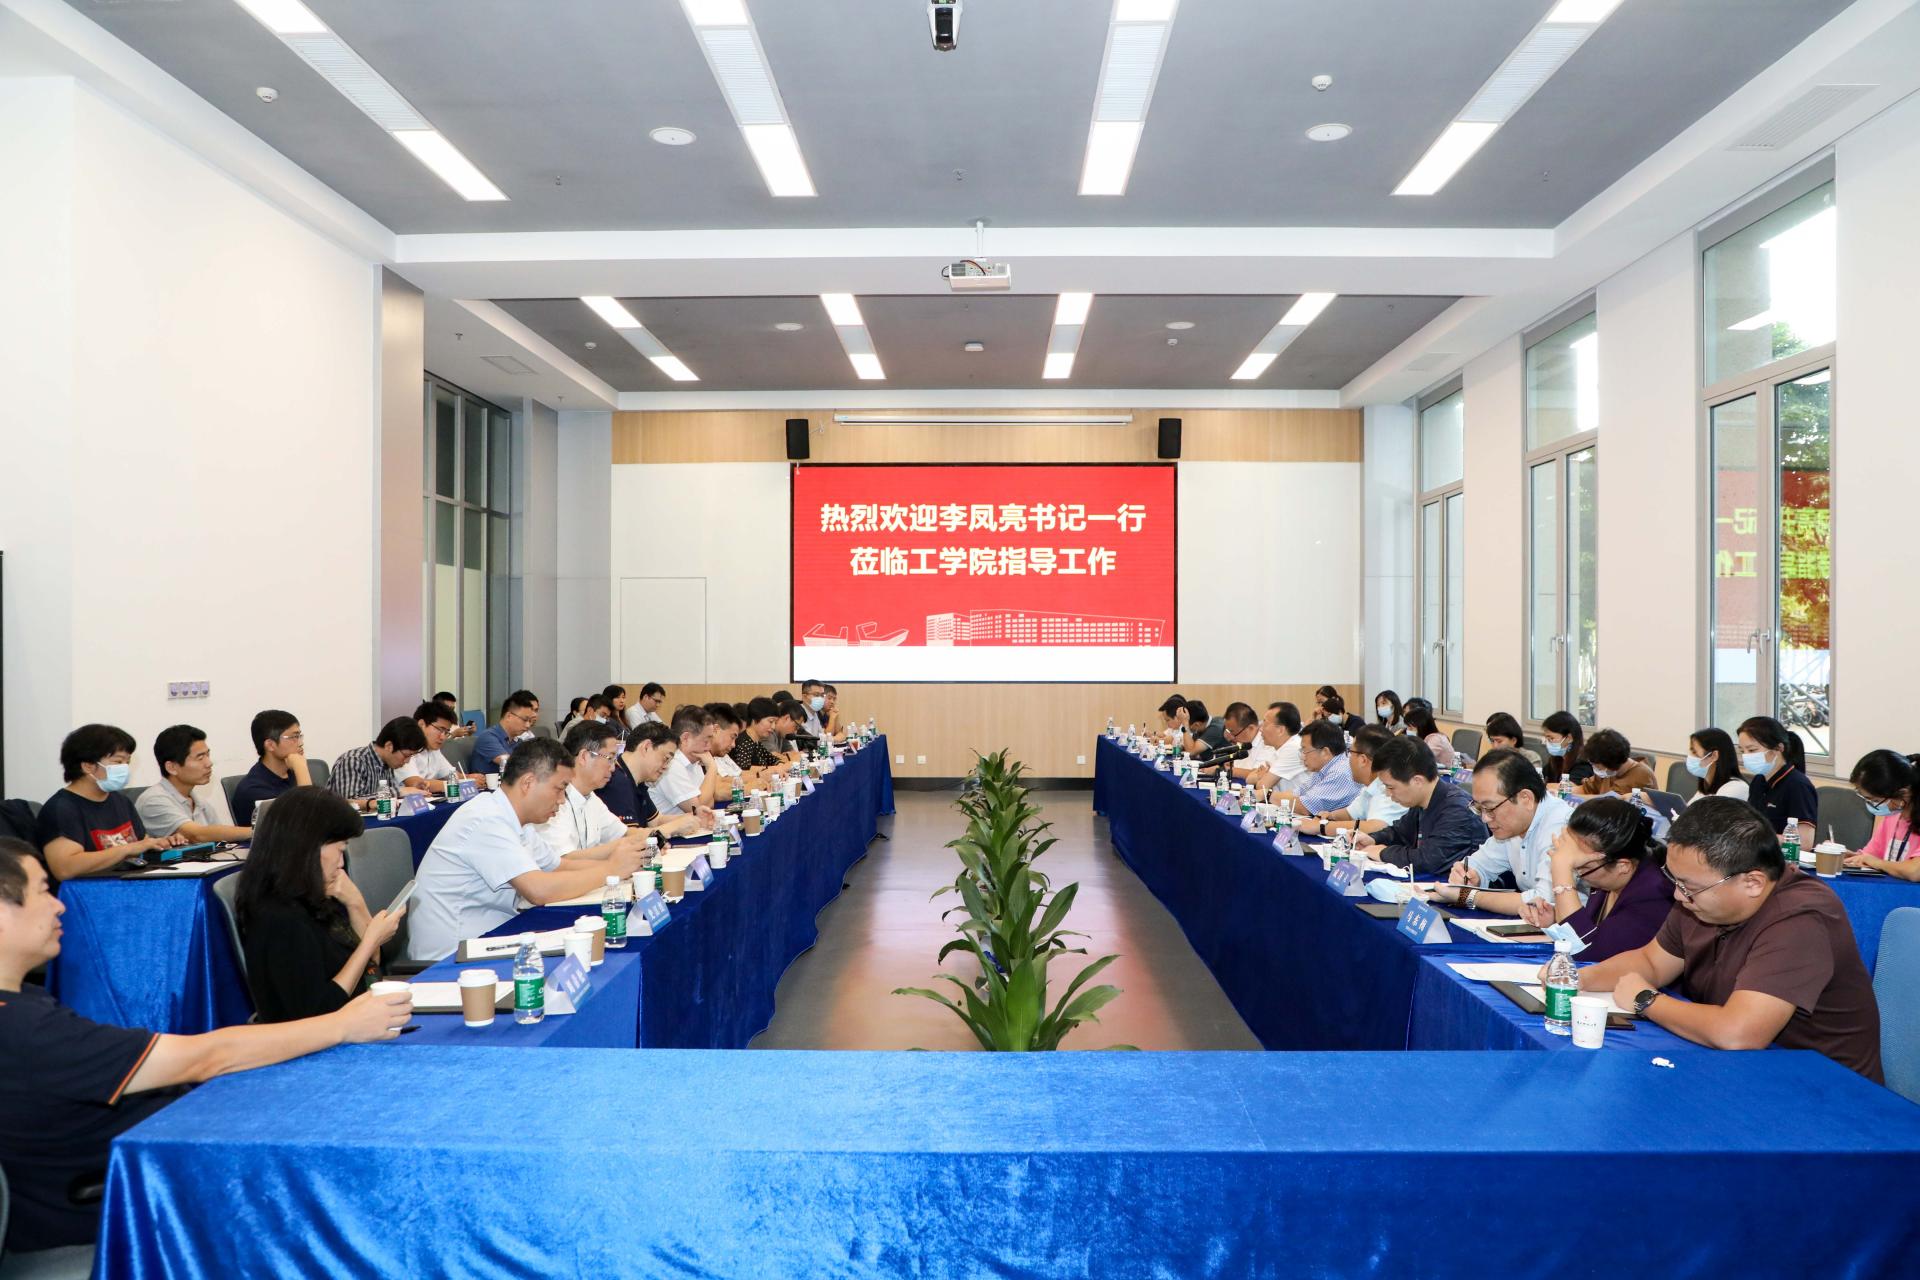 Chairperson Fengliang LI and his delegation visits College of Engineering